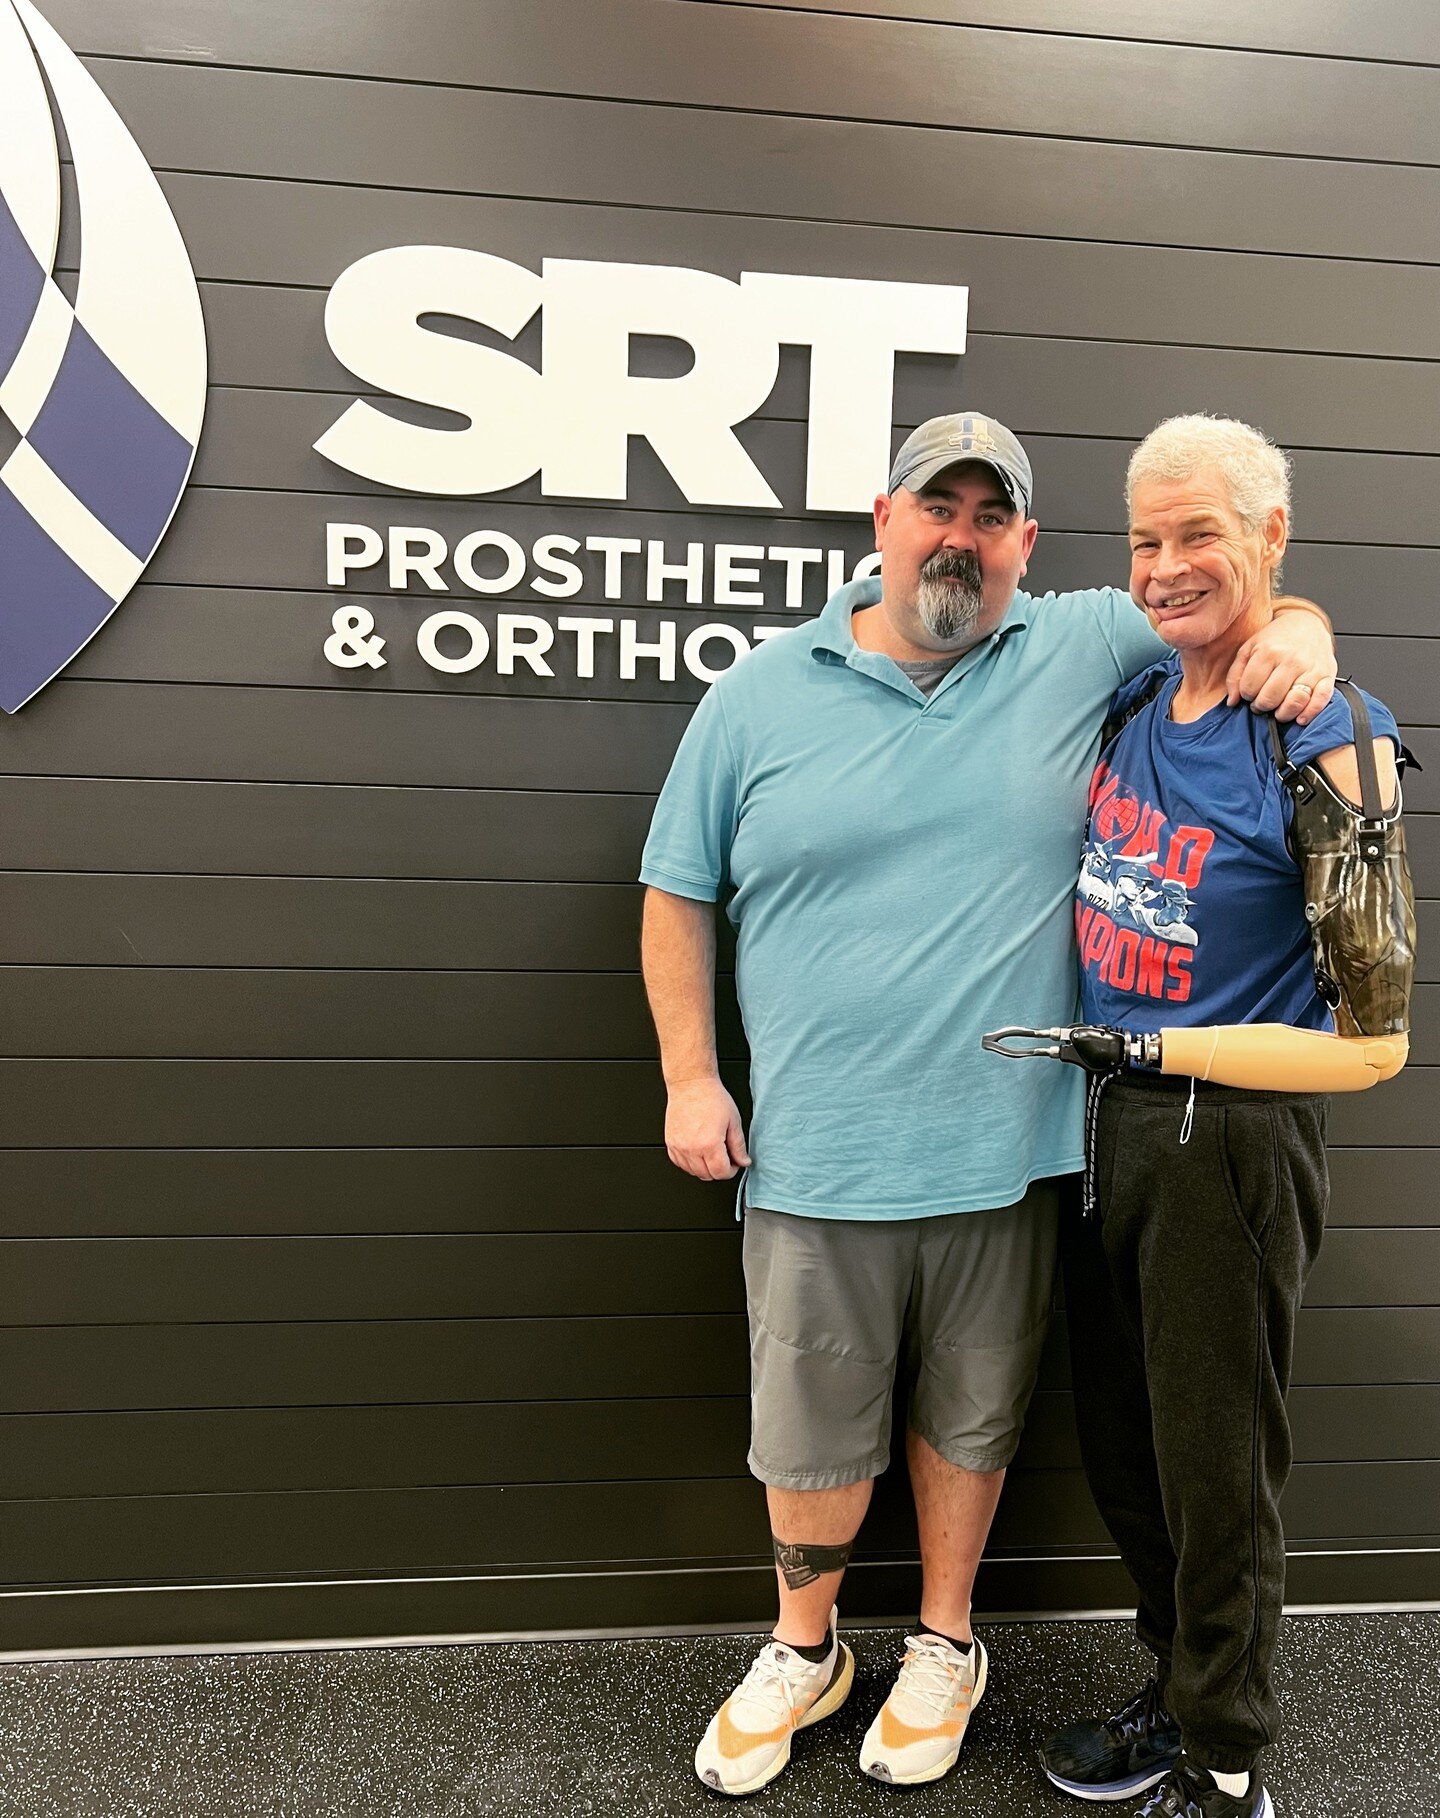 Trinity (SRT's upper extremity lab tech) usually blends in with the crowd, but on this day he and Corbin shined bright showing off this new custom camo socket! 

Corbin came to us in 2023 after a complication from cancer caused him to lose his arm. T